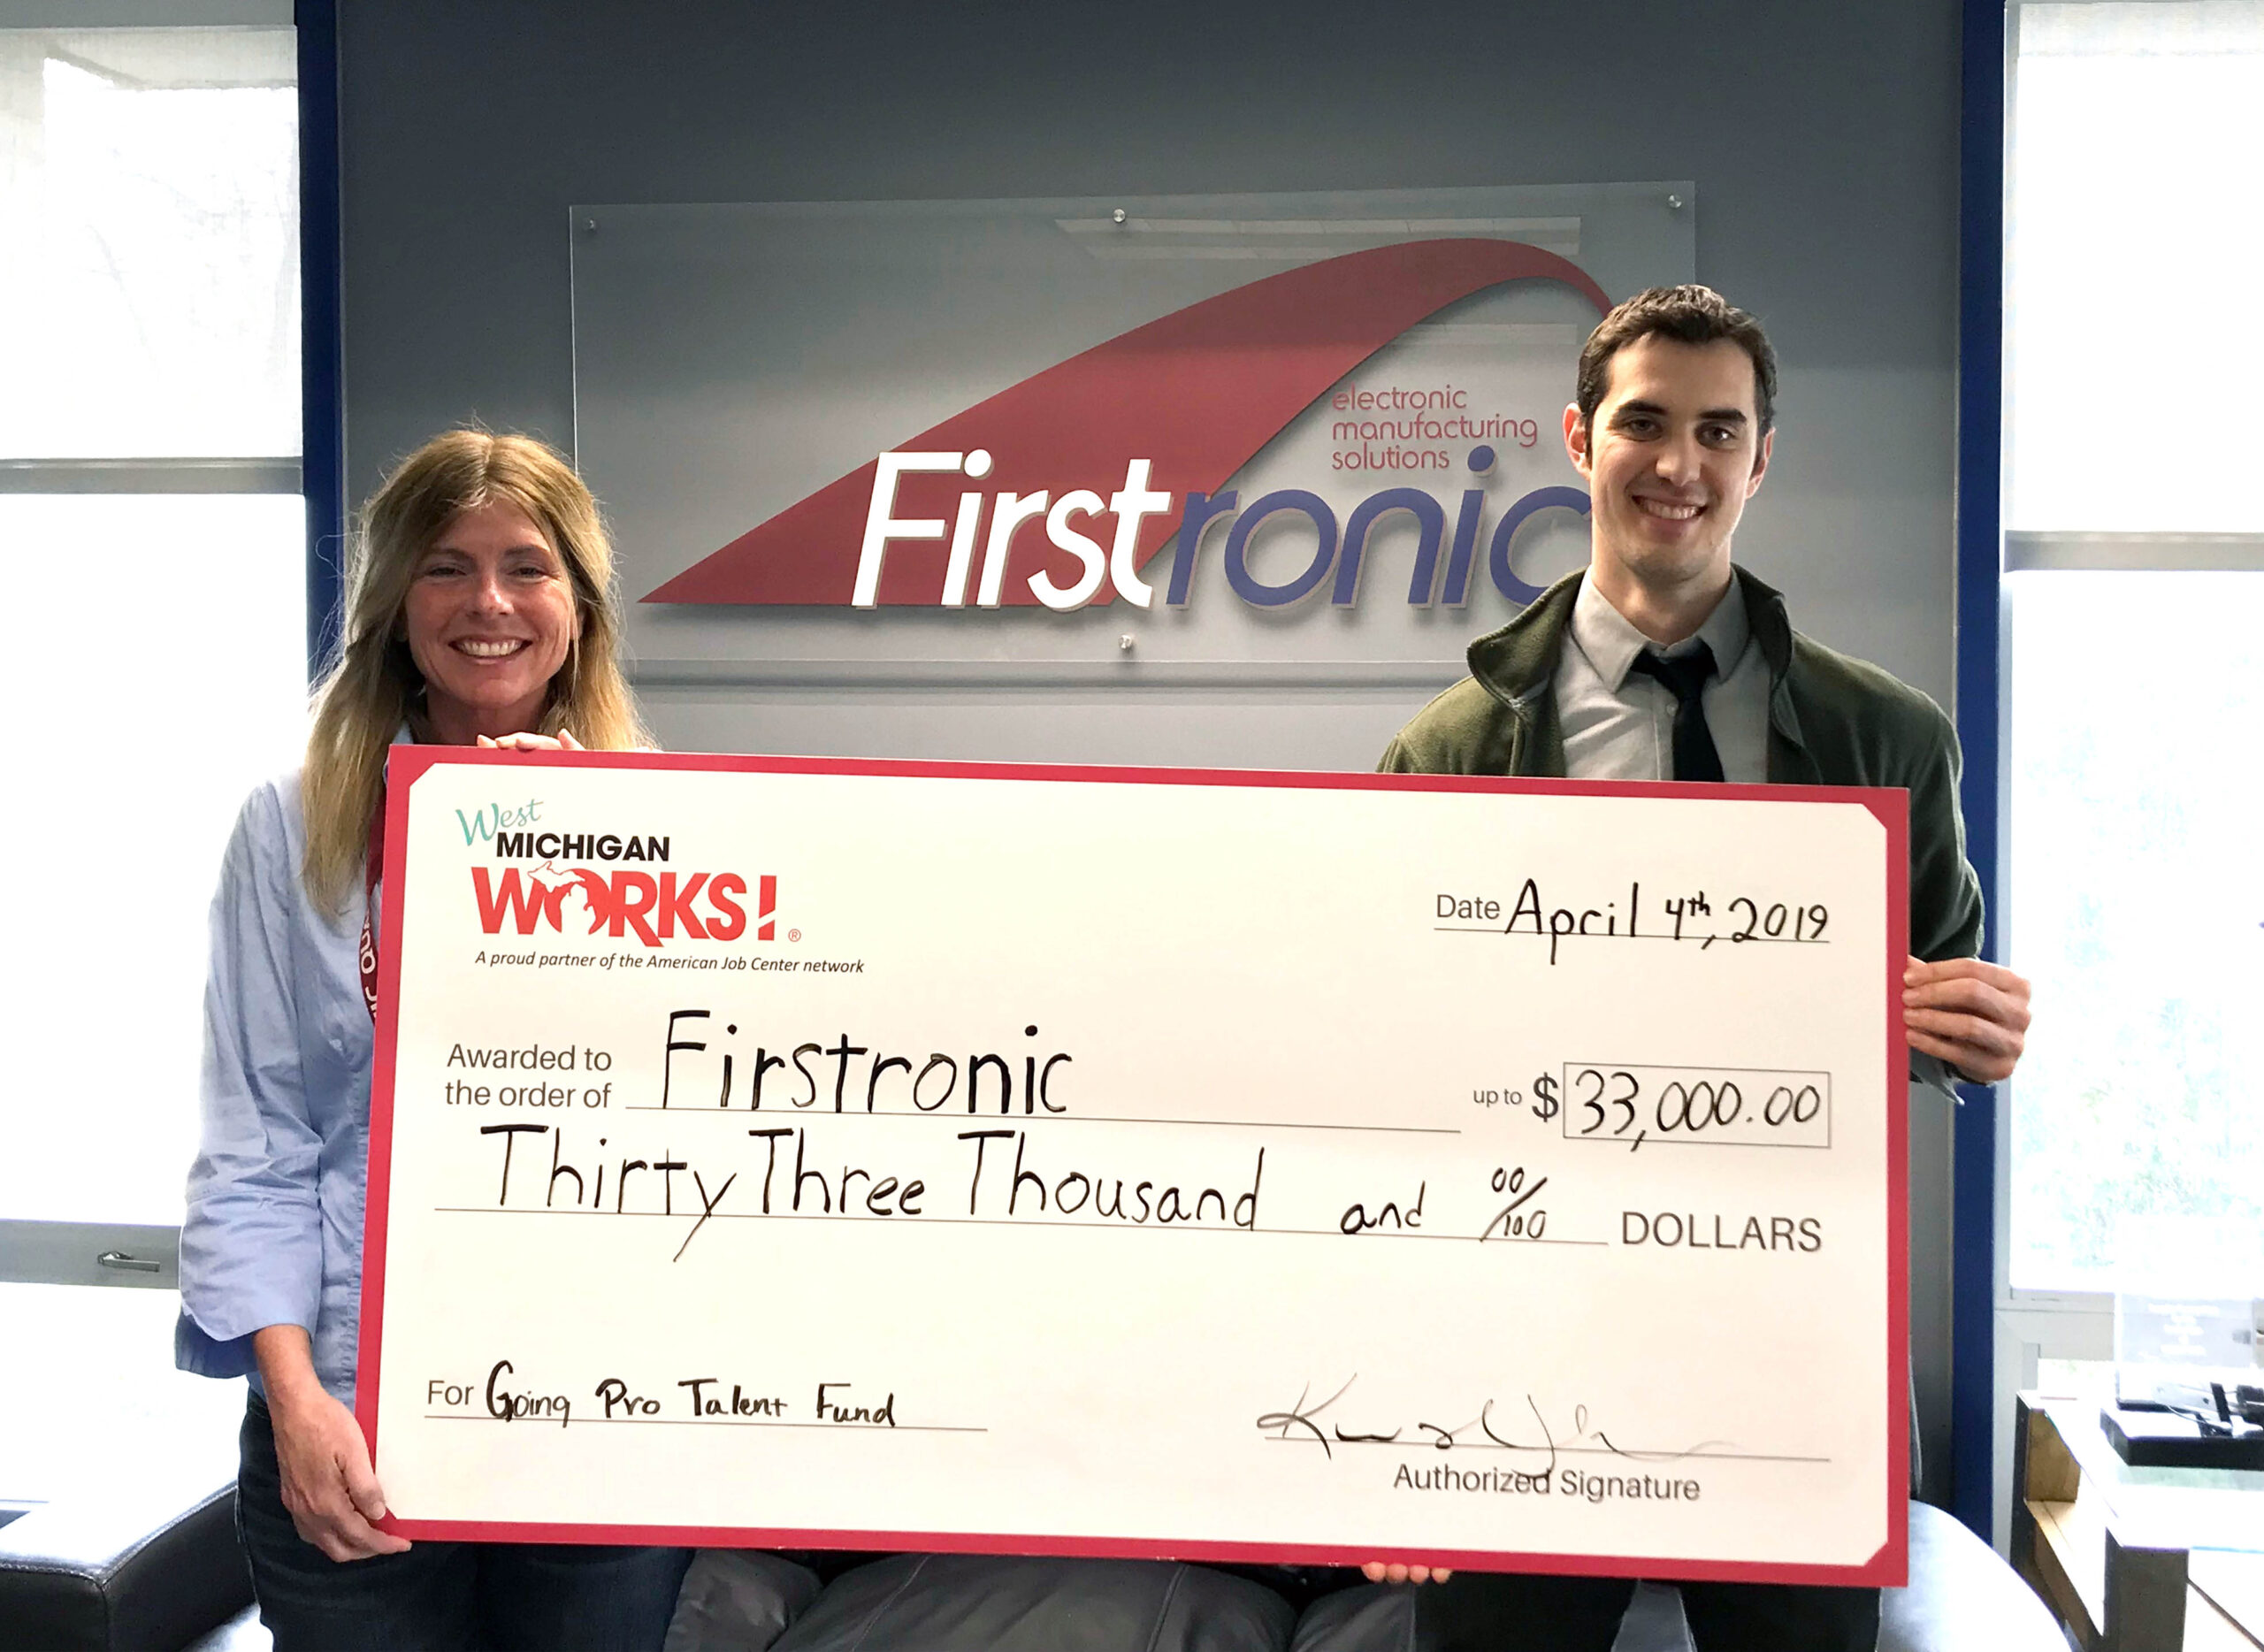 Firstronic, one of 223 employers who received Going PRO awards in 2019